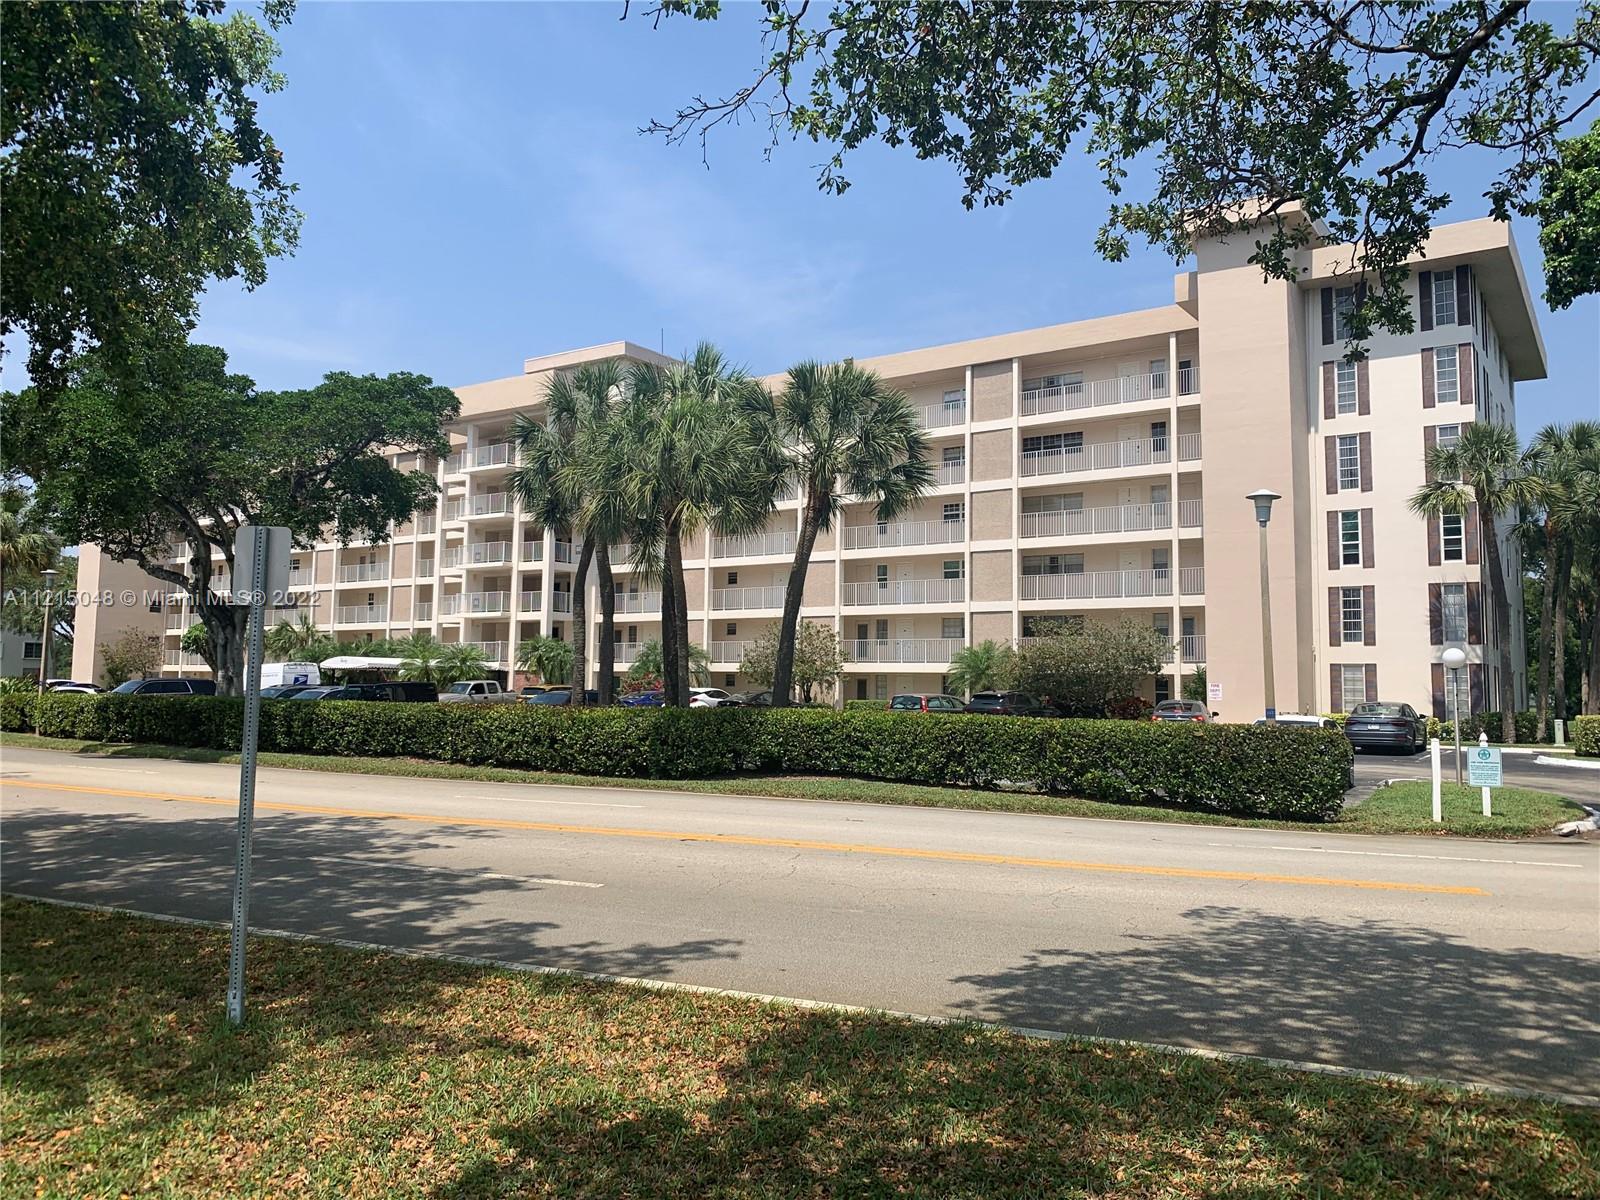 BRIGHT CLEAN AND SPACIOUS 2/2 CONDO IN GREAT AREA. PALM AIRE HAS MANY AMMENITIES INCLUDING WALKING T